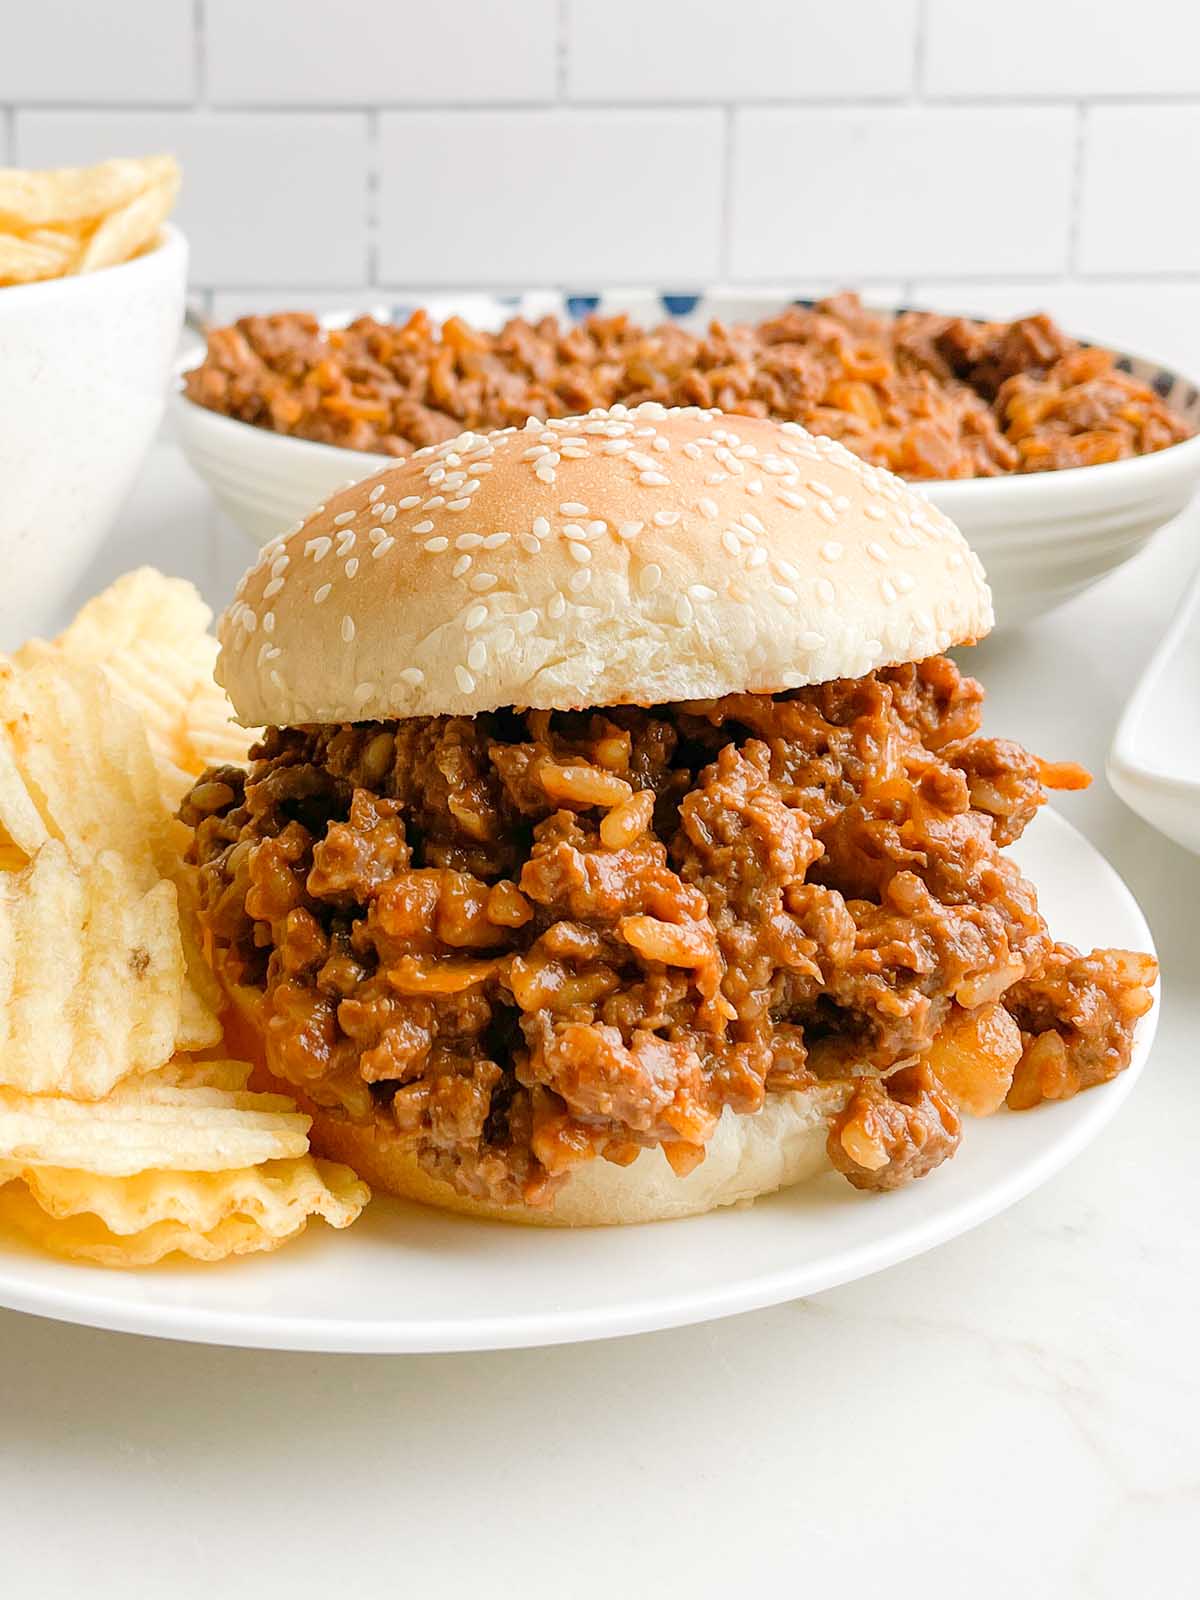 chicken gumbo sloppy joe on a white plate with potato chips.